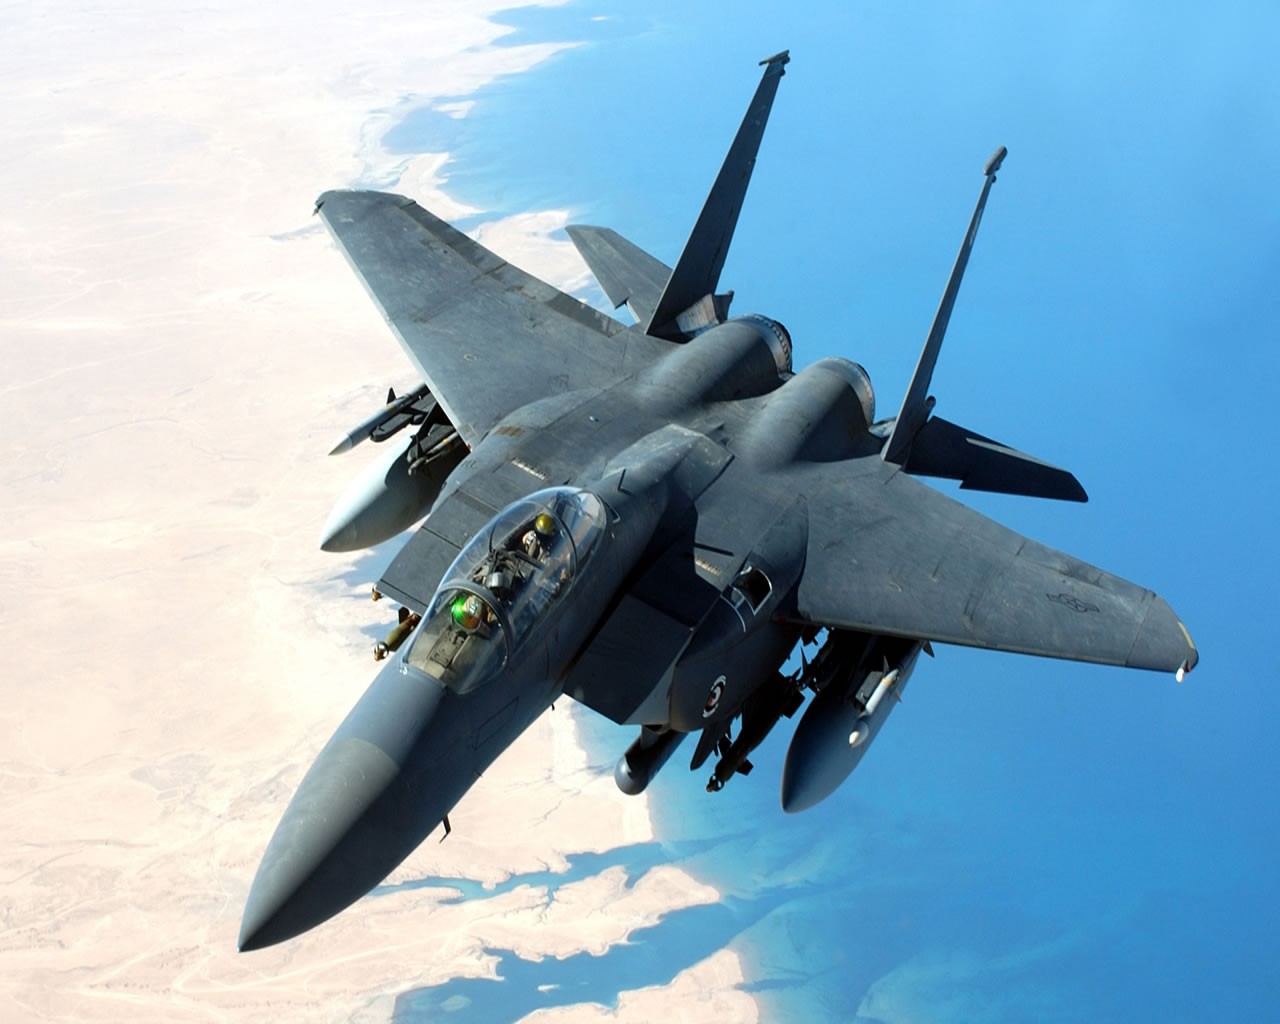 General 1280x1024 F-15 Eagle military aircraft vehicle aircraft military military vehicle American aircraft McDonnell Douglas